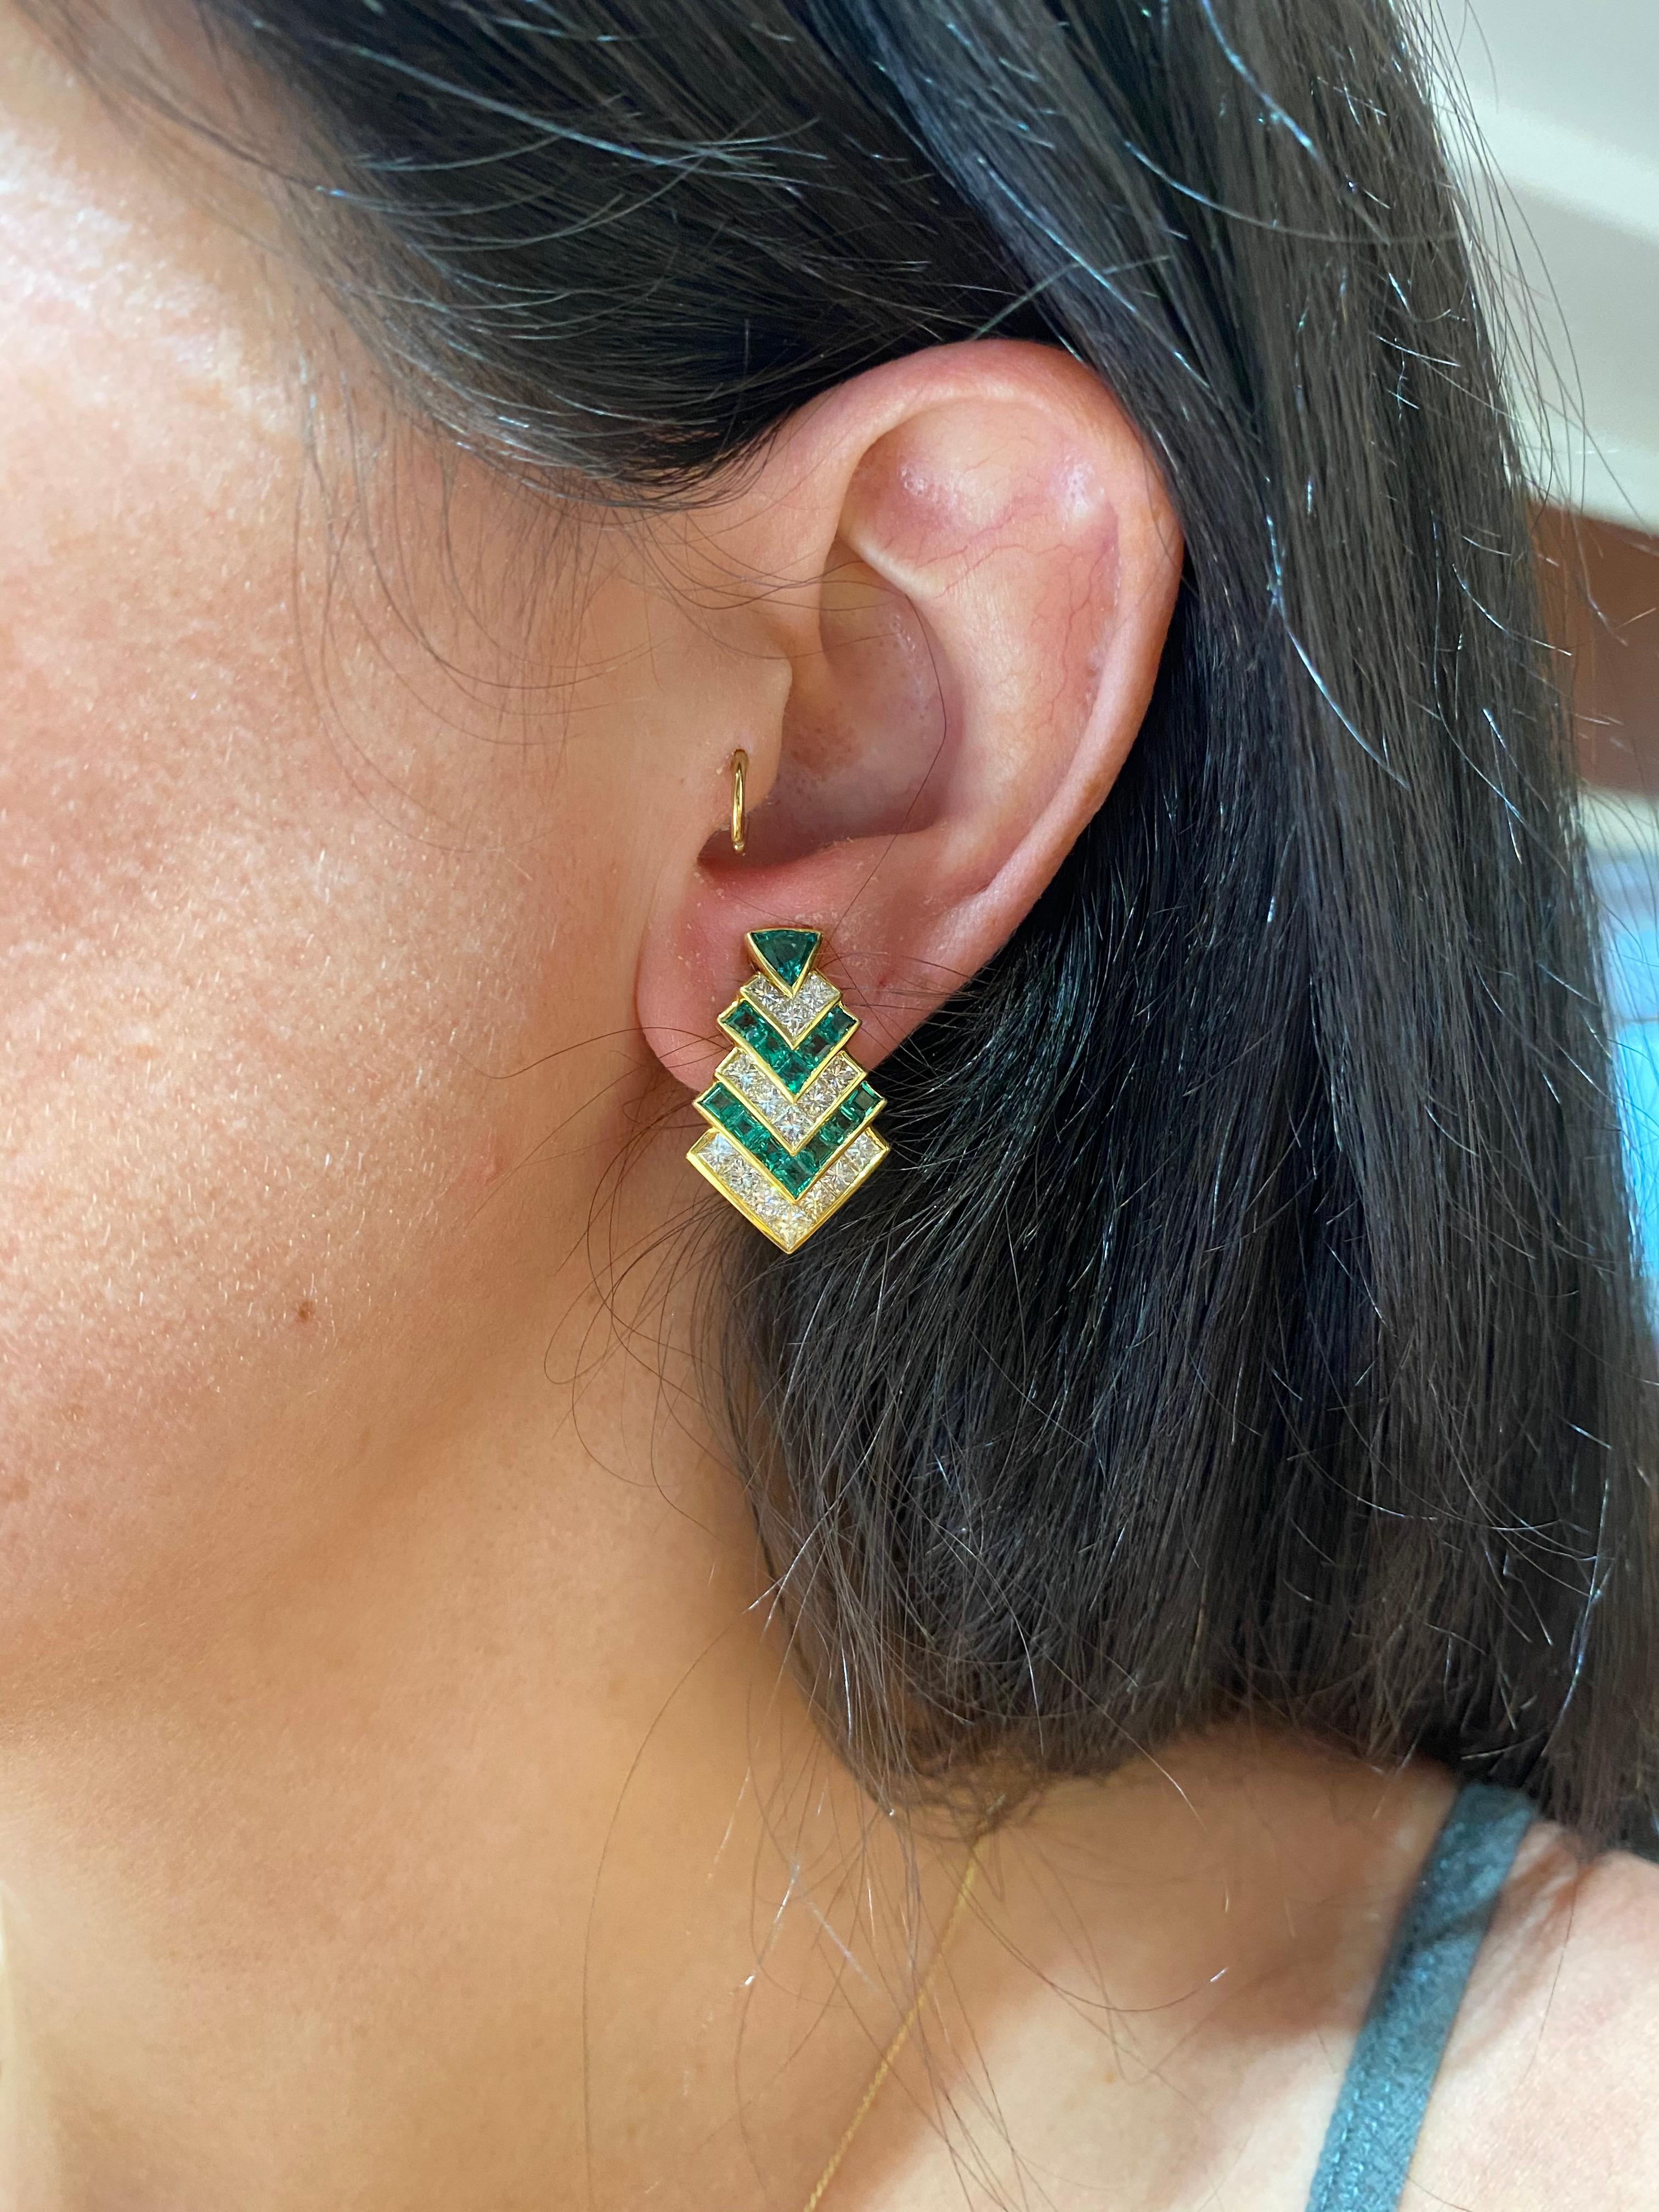 Chevron designed diamonds and emeralds for a refined but edgy look. Hammerman Brothers 18 karat yellow gold emerald and diamond earrings with square-cut emeralds and diamonds with a trilliant cut emerald top. 30 princess cut diamonds, totaling 3.57